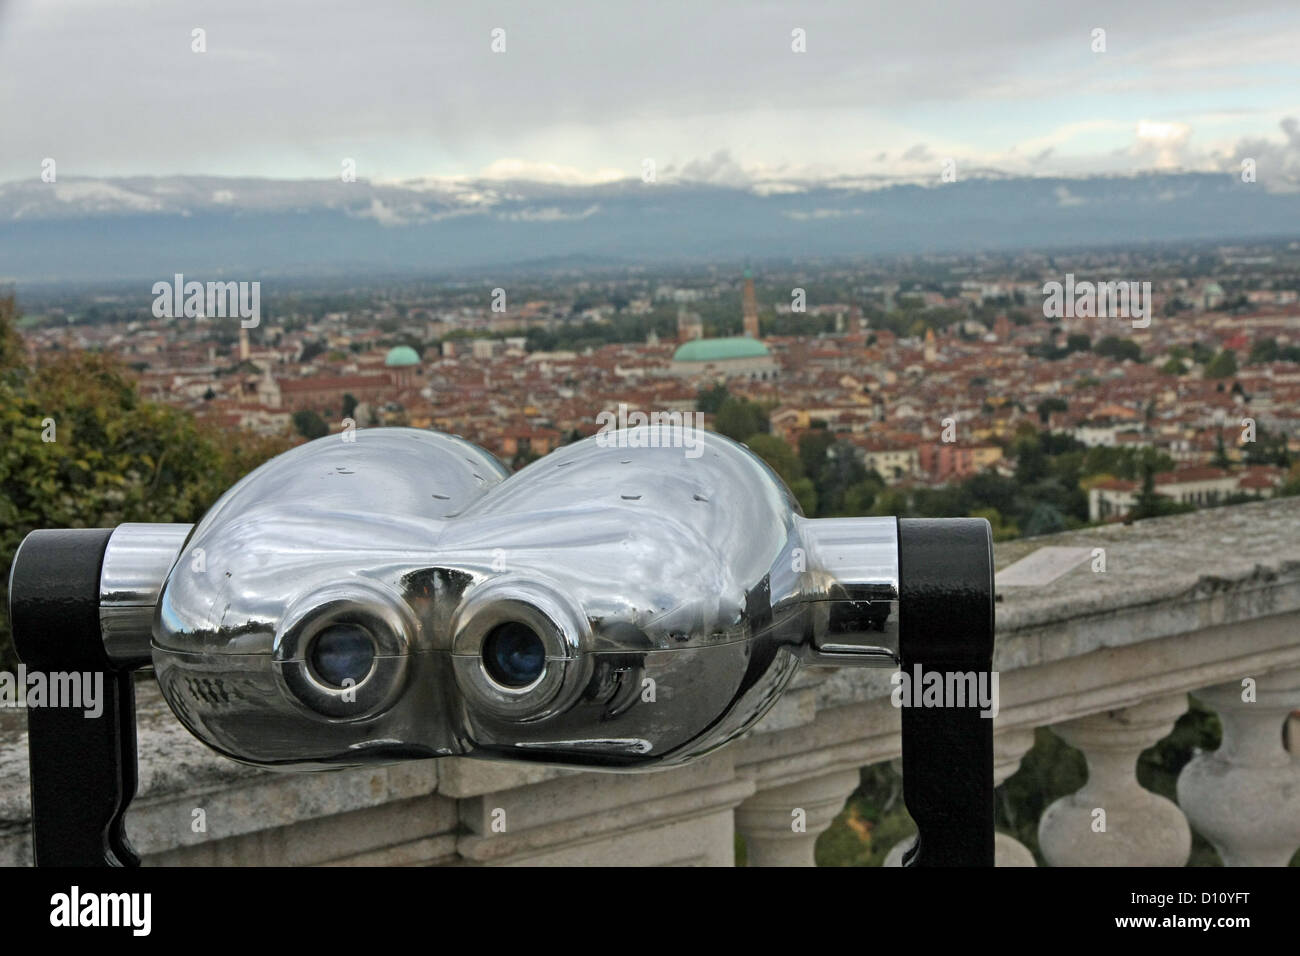 glistening Binoculars to watch the landscape of the beautiful city of vicenza Stock Photo